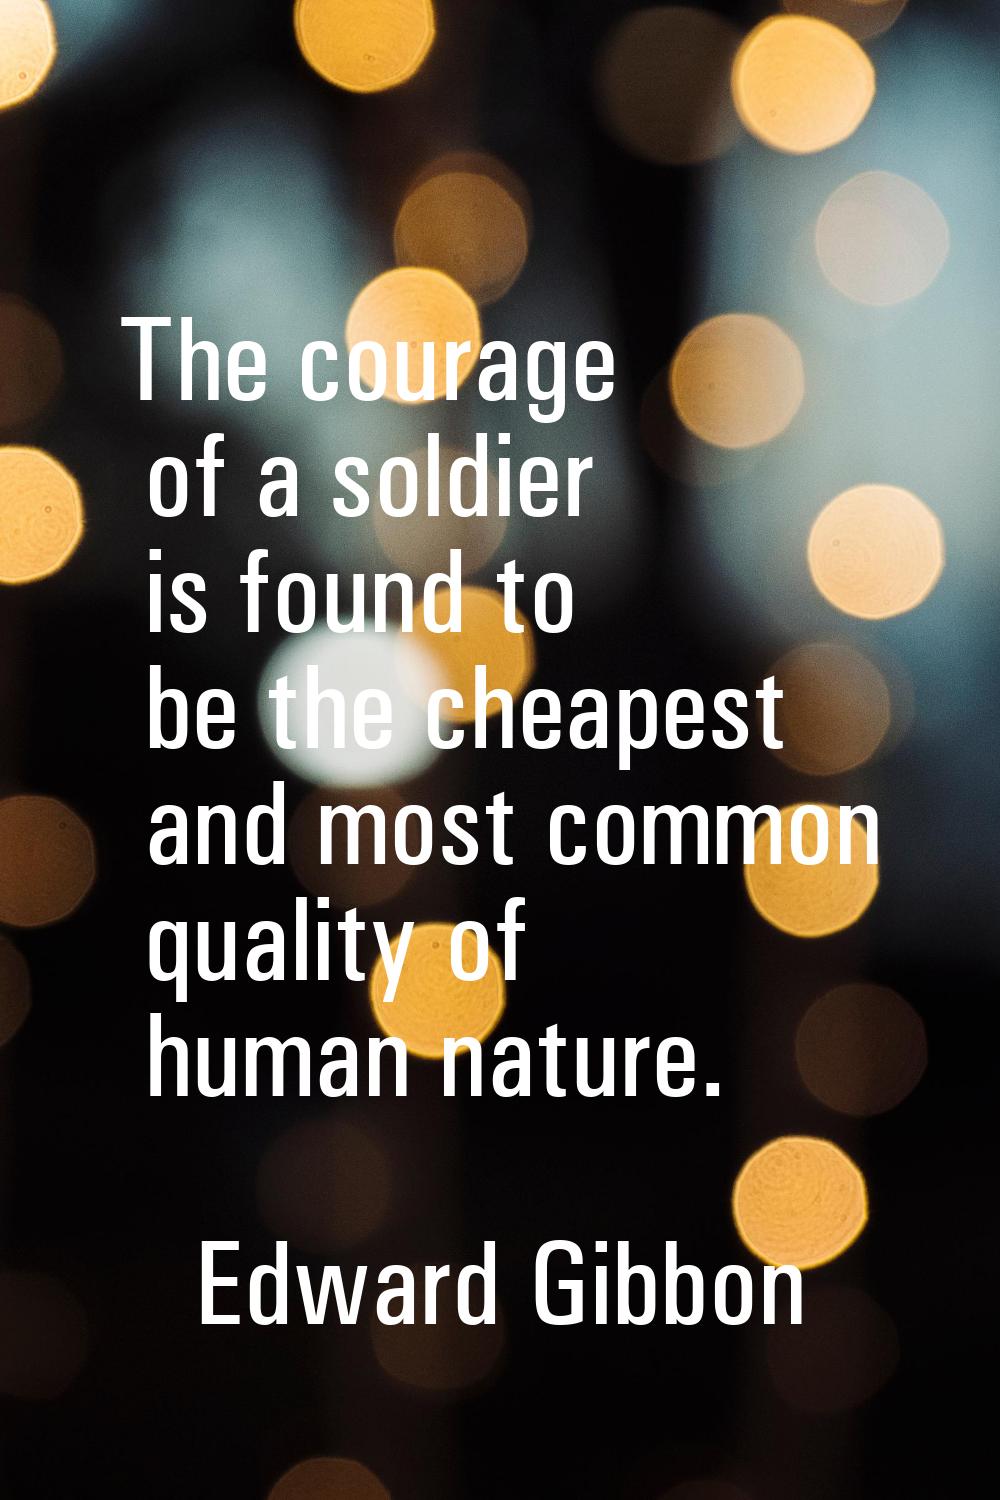 The courage of a soldier is found to be the cheapest and most common quality of human nature.